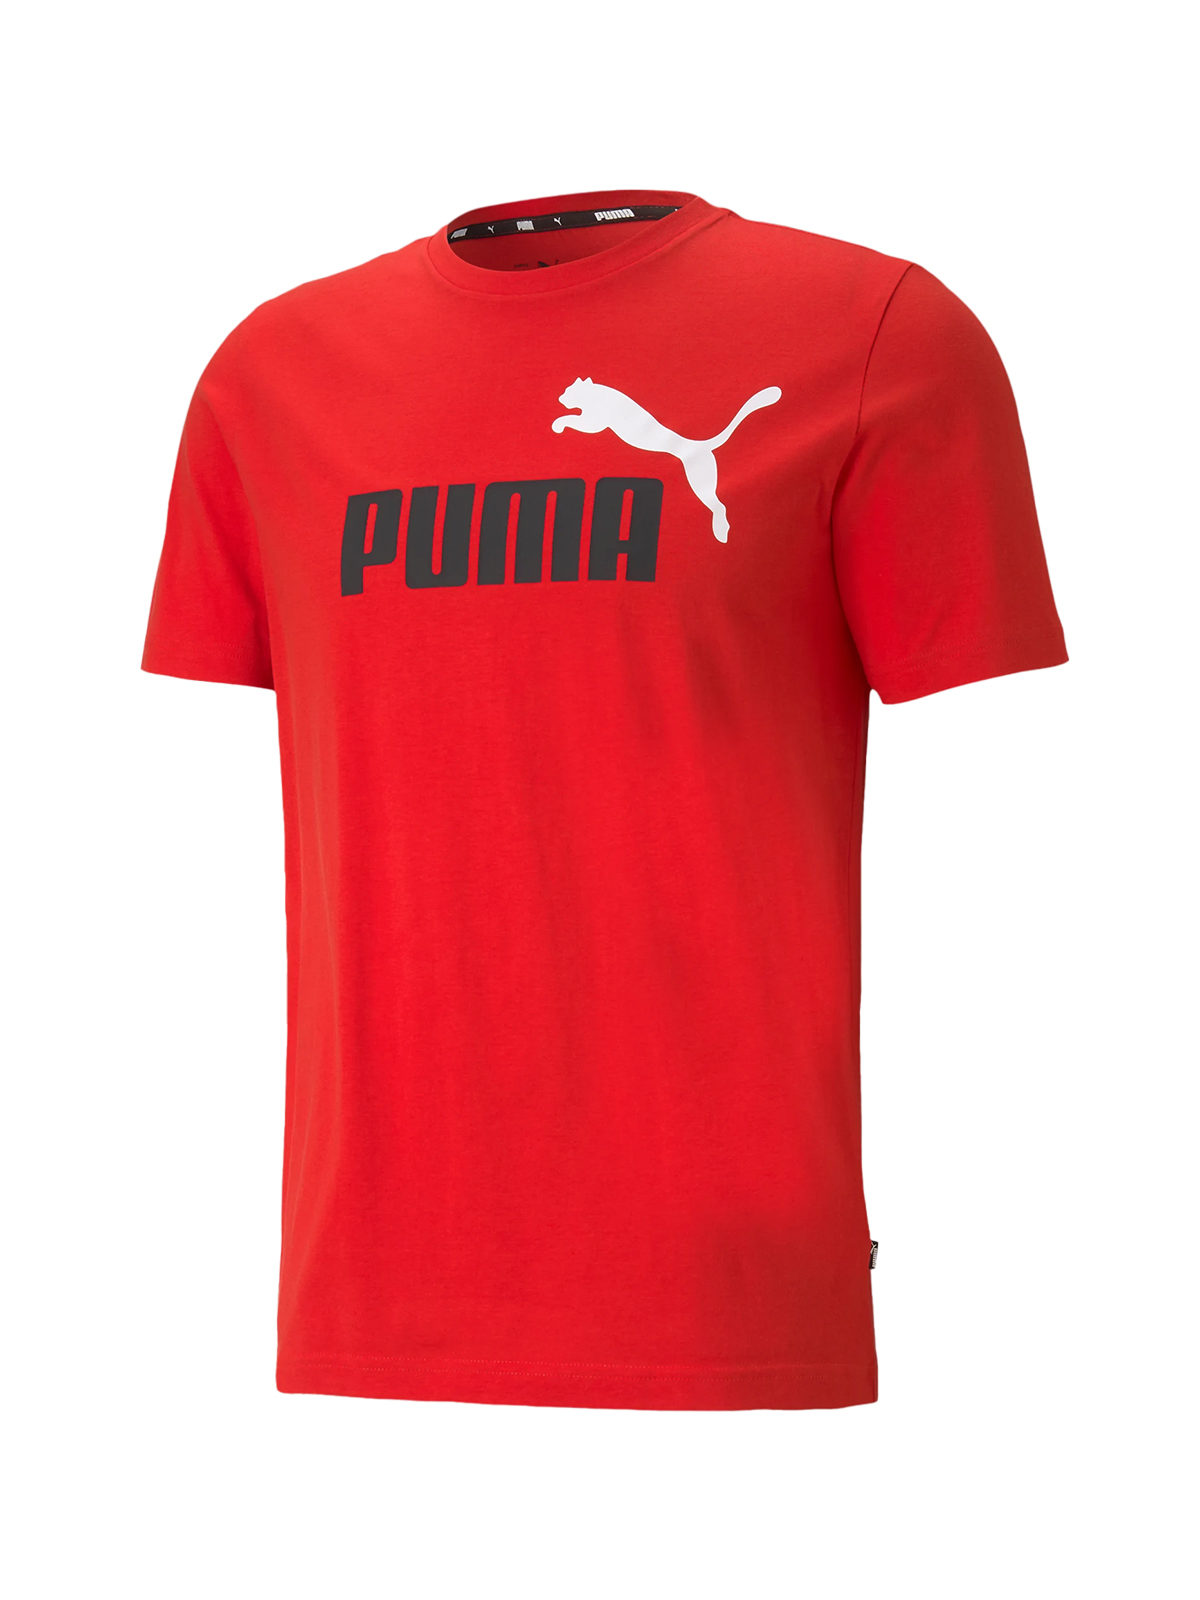 Puma ESS + 2 COL LOGO TEE Men\'s short sleeve T-shirt: for sale at 20.69€ on